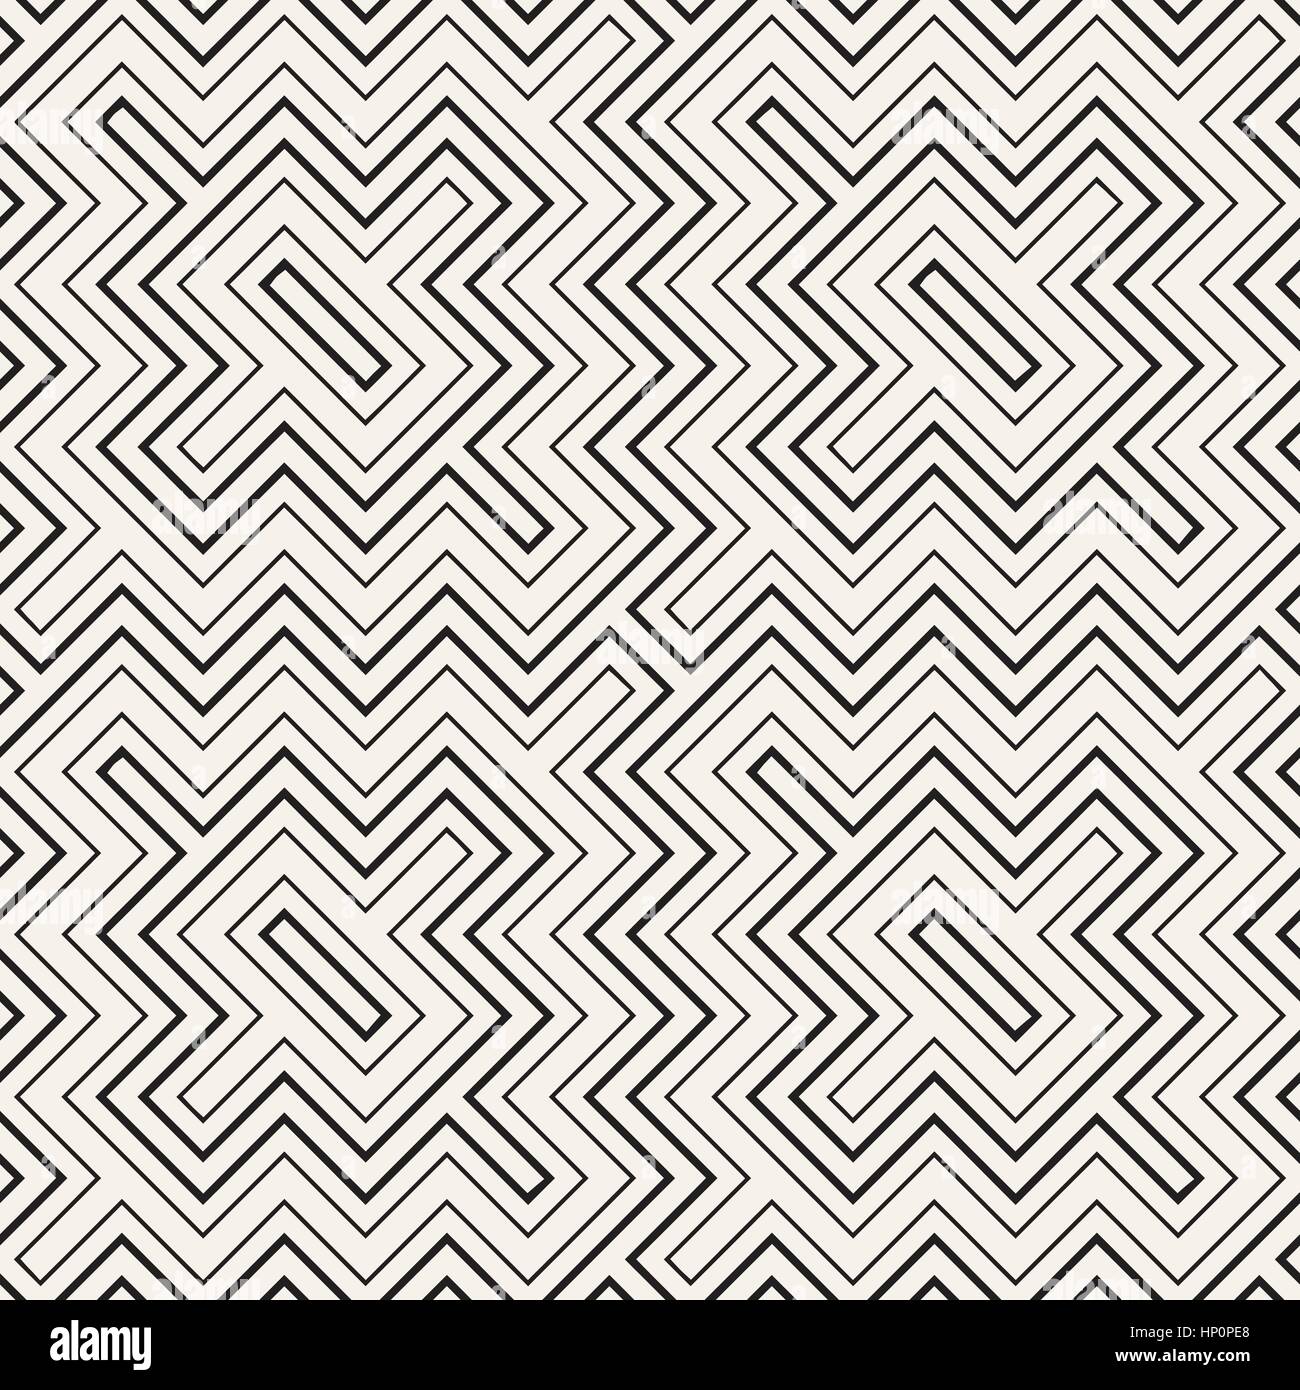 Ethnic Ornament Native Lines Stylish Print. Vector Seamless Black and White Pattern Stock Vector